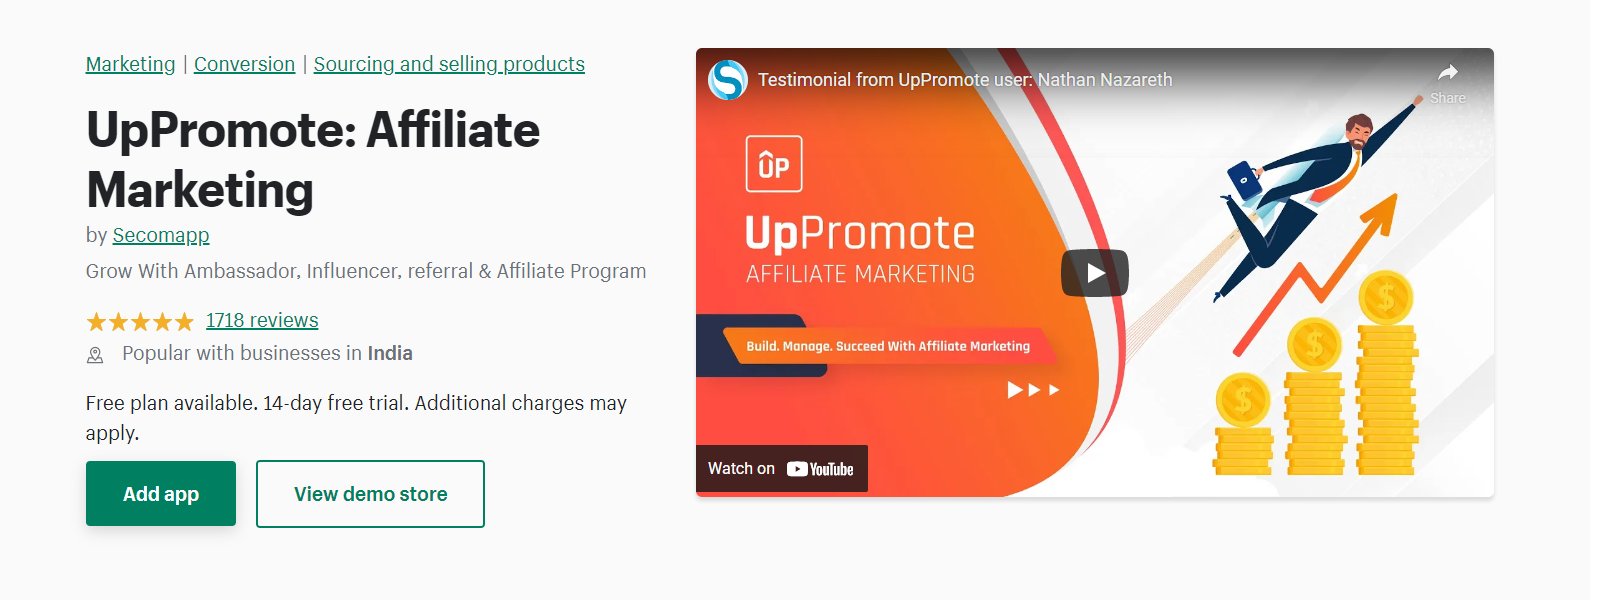 UpPromote - Affiliate Marketing Apps